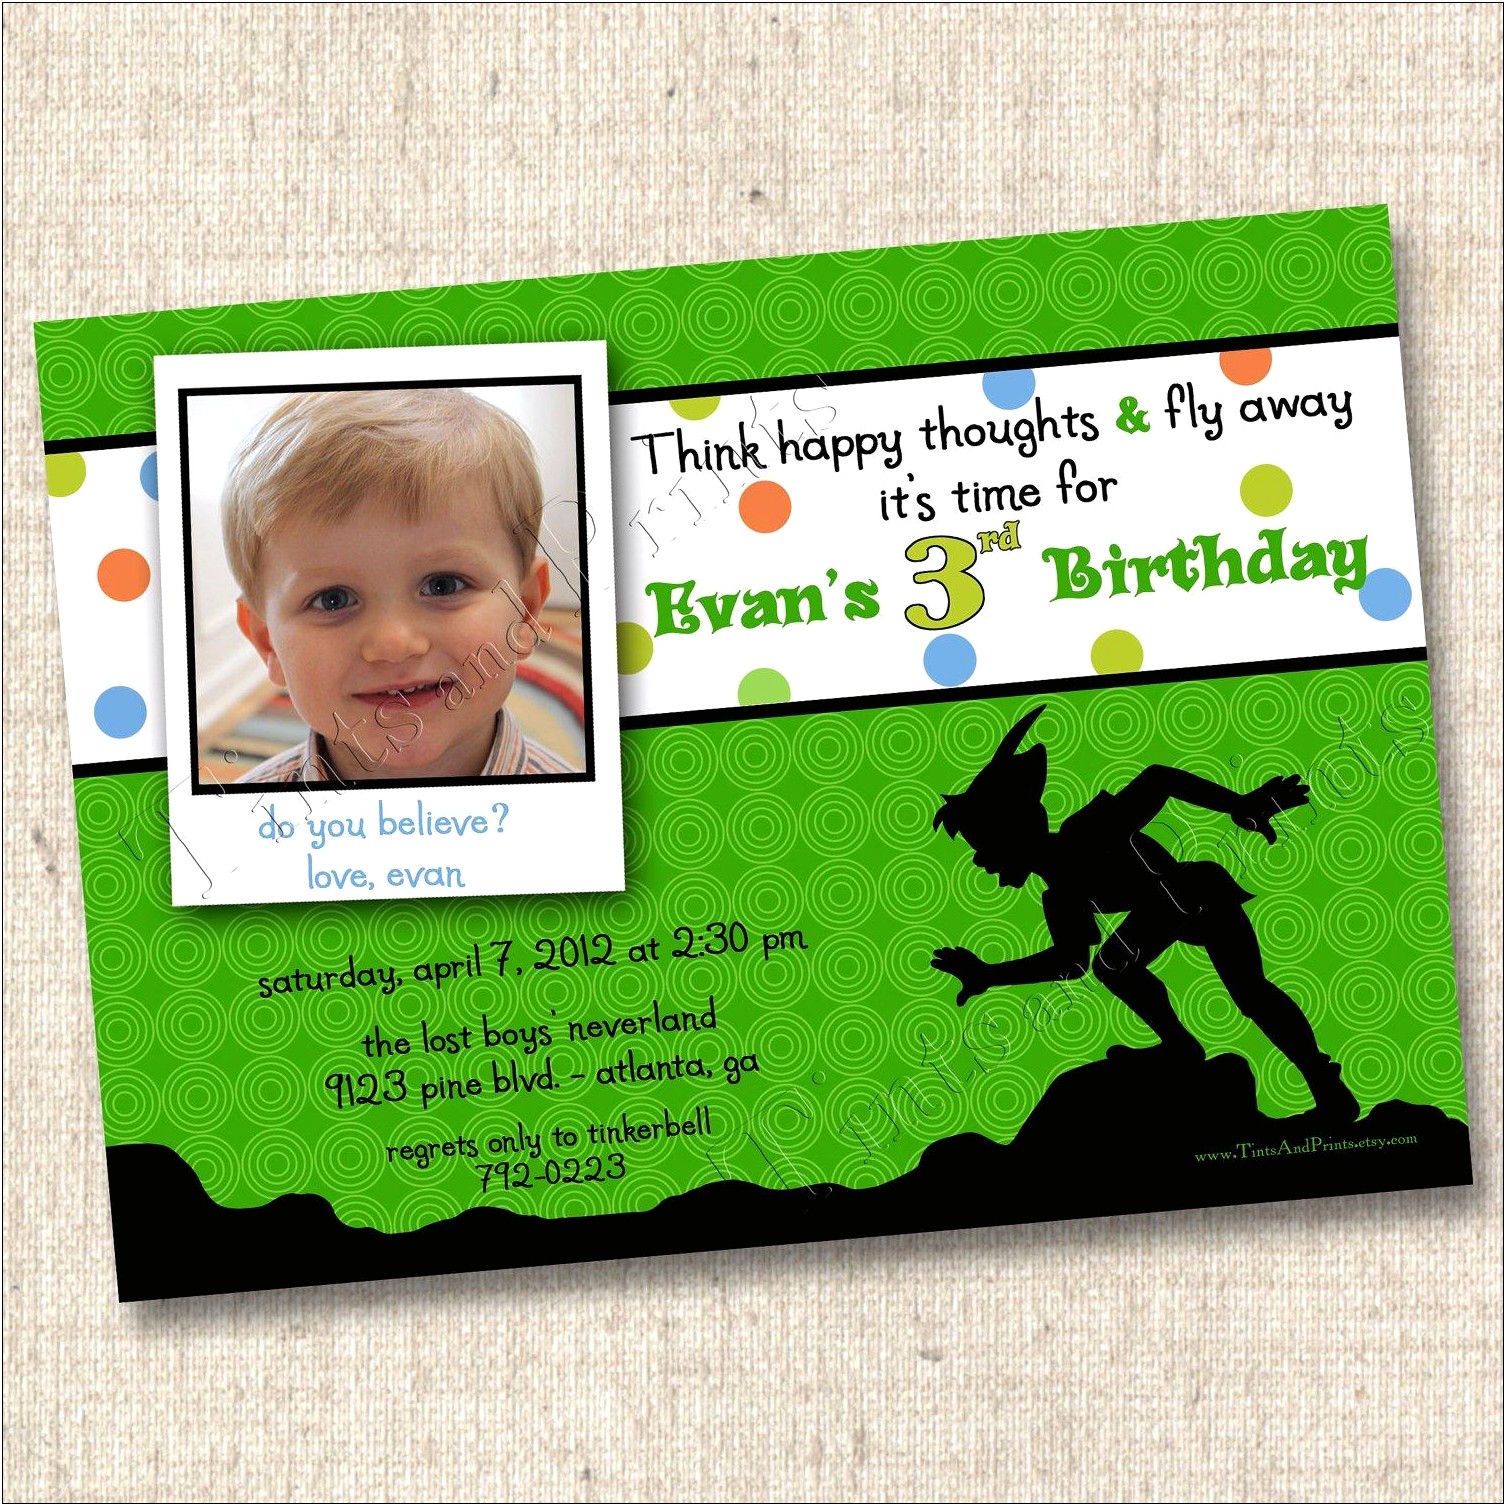 Tinkerbell & Peter Pan Party Invitation Templates Free